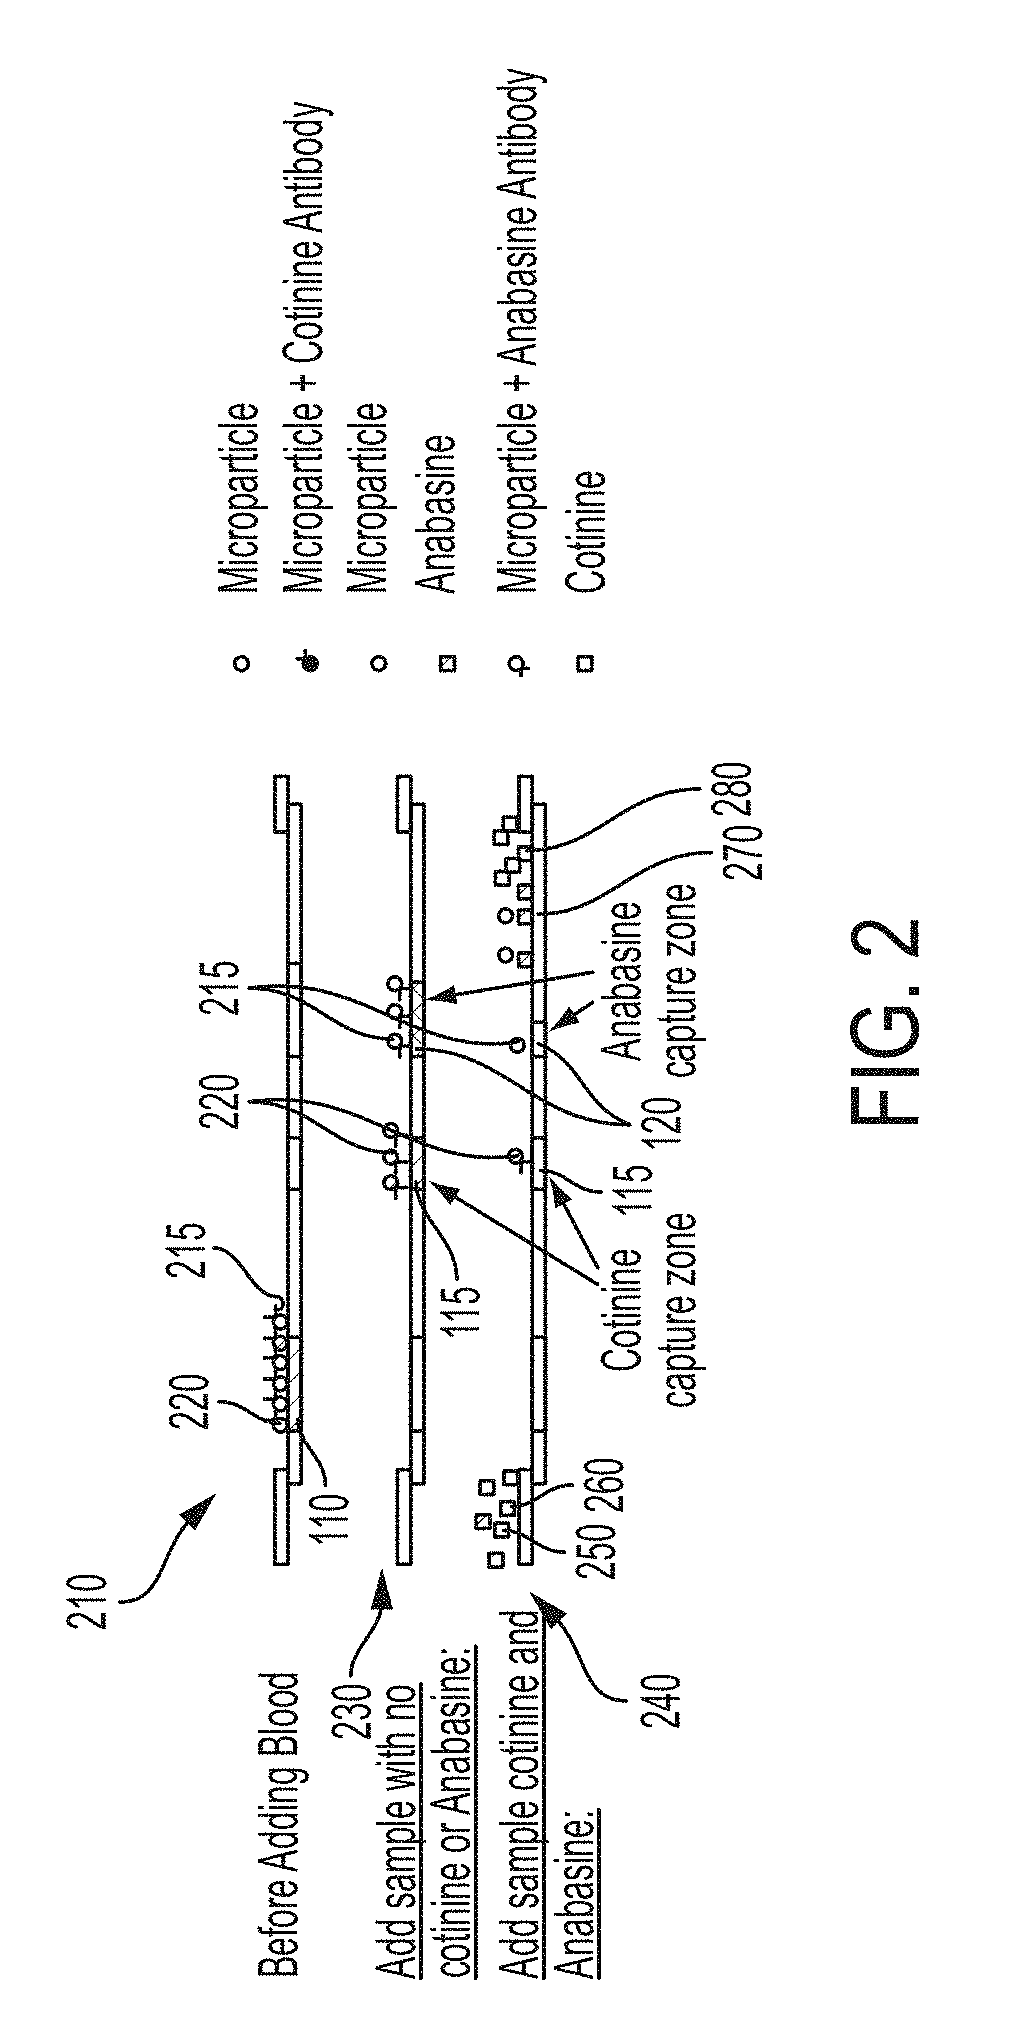 Systems and methods for distinguishing cotinine from anabasine in a point-of-care testing device